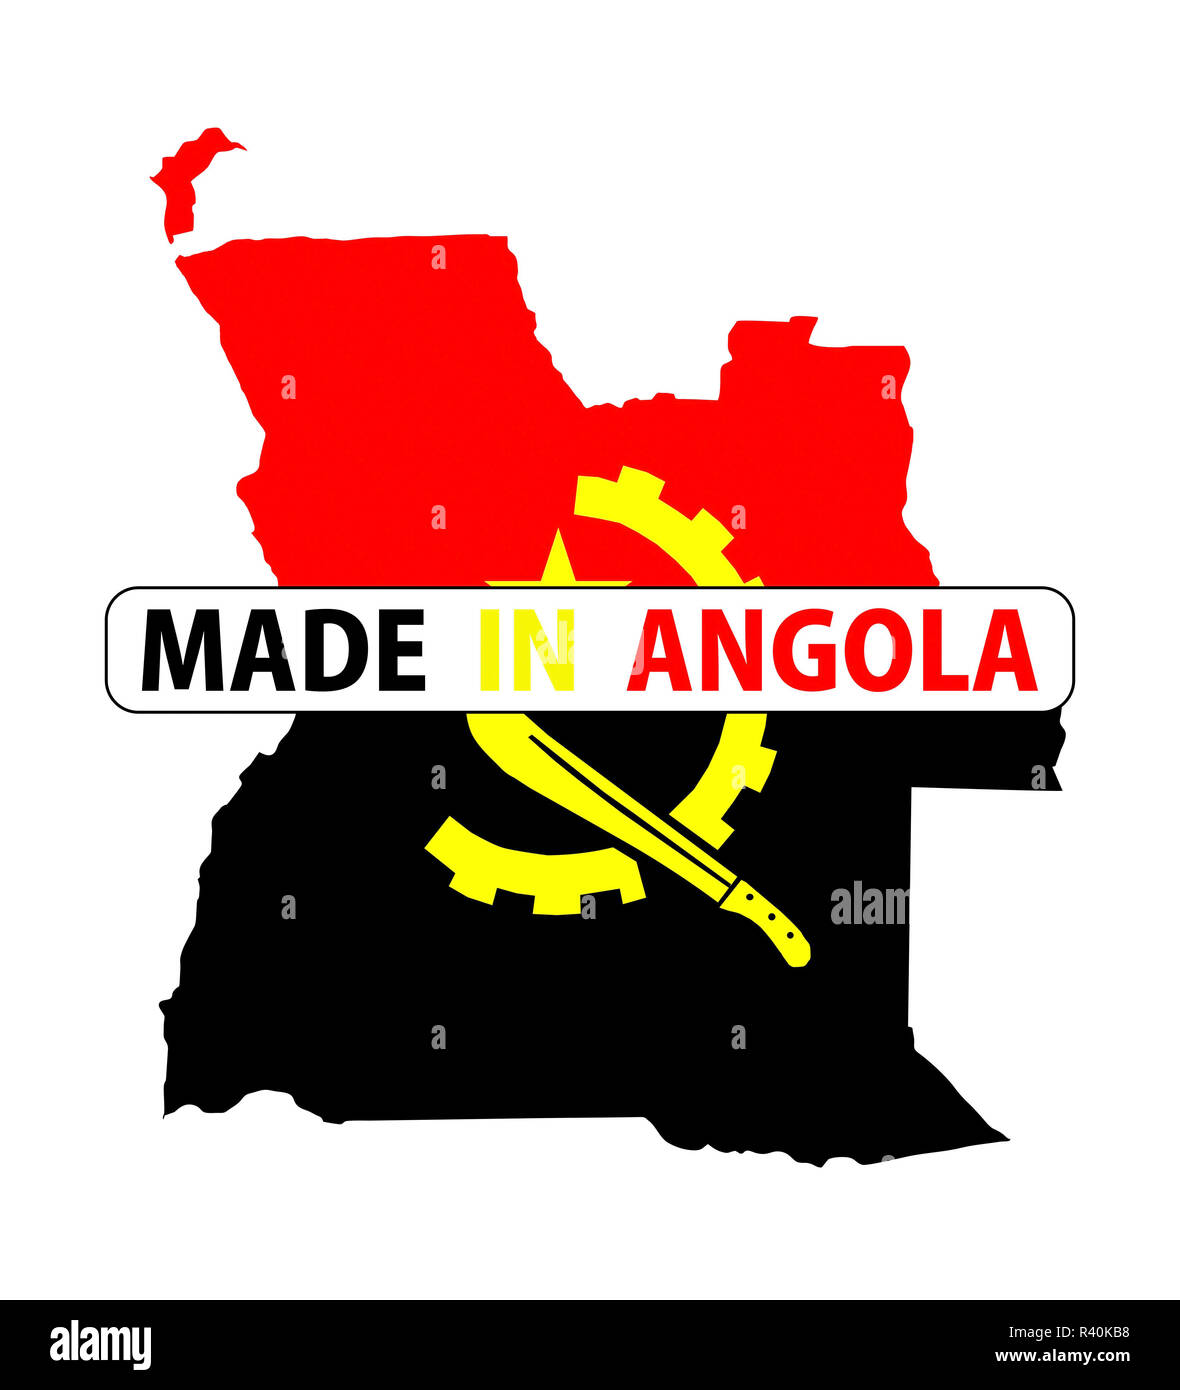 made in angola Stock Photo